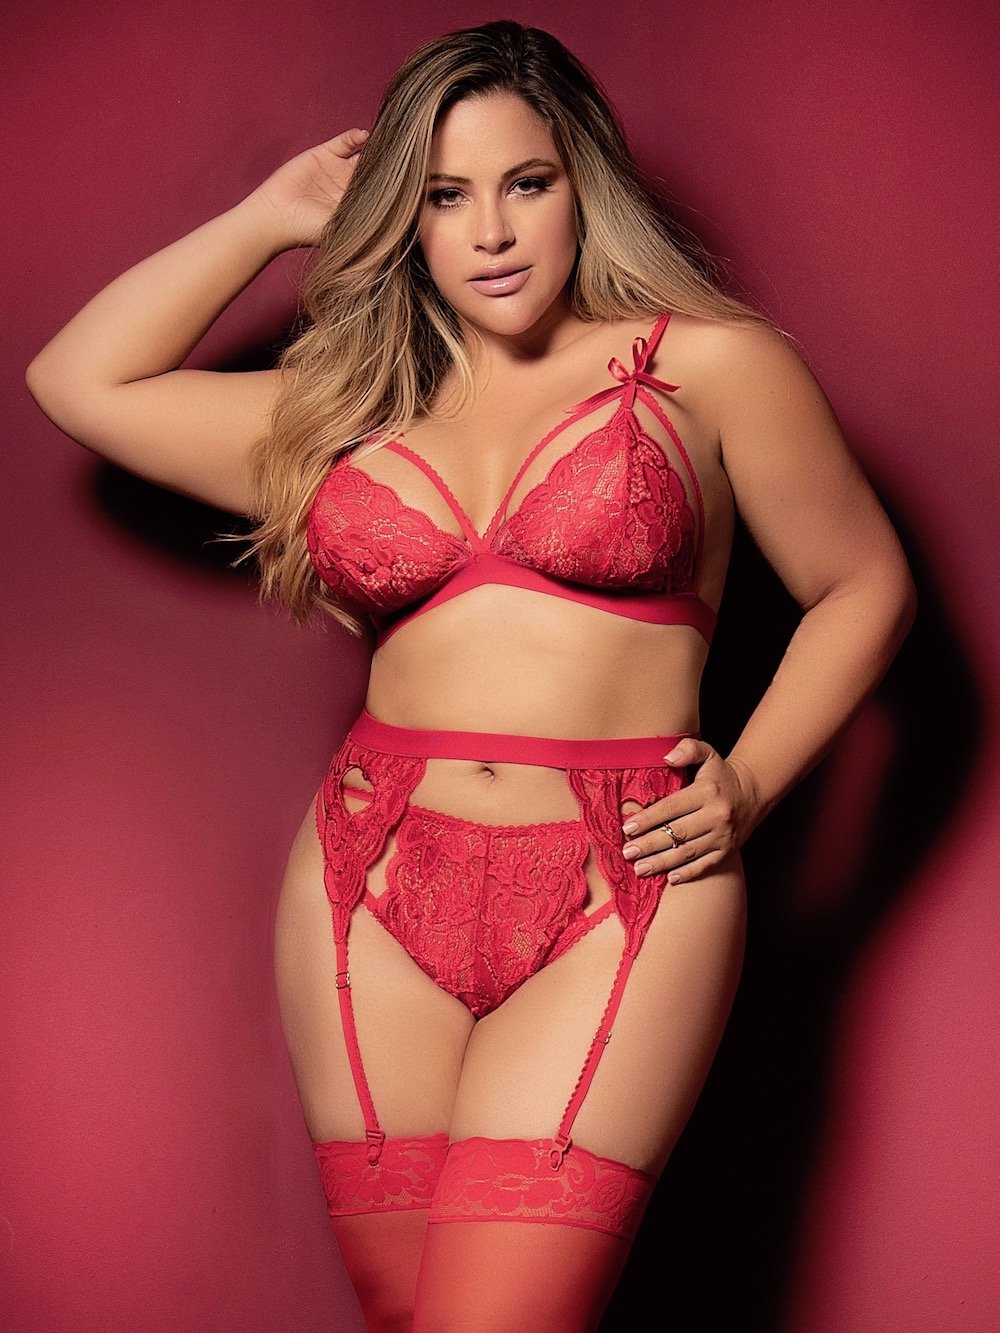 Plus Size Lingerie, Women Crotchless Lingerie, Sexy Babydoll and Teddy Tagged photo